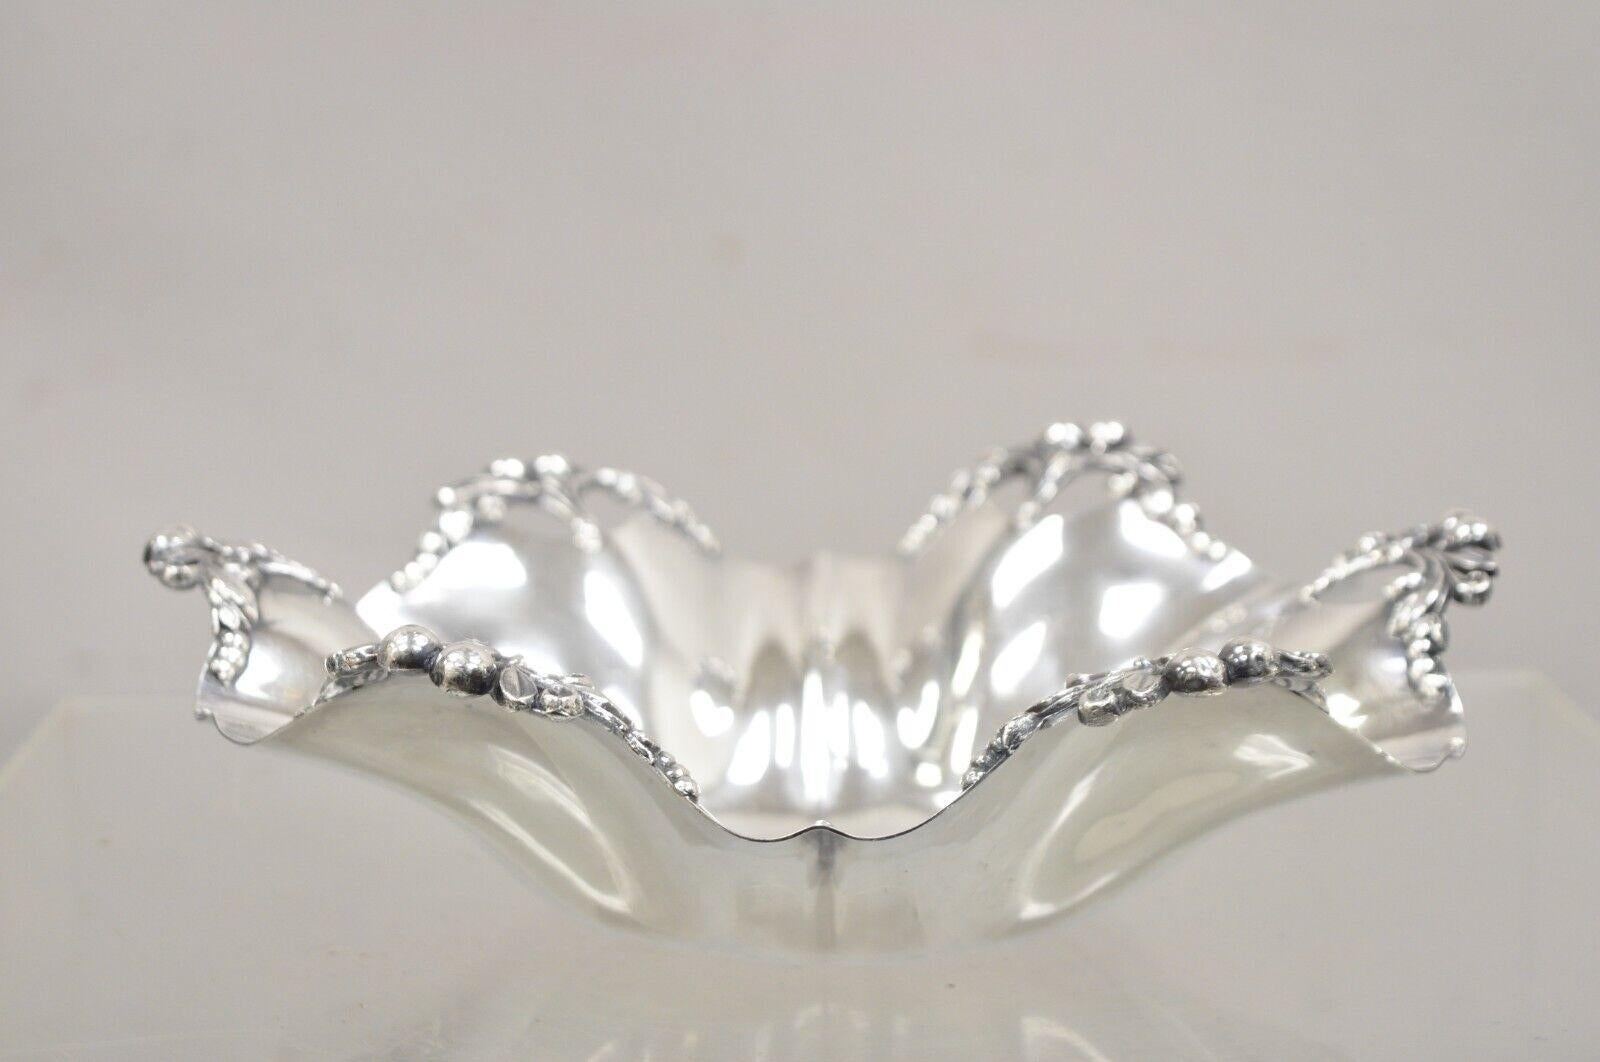 Vintage Victorian Silver Plated Handkerchief Candy Dish Fruit Bowl Berry Design For Sale 7